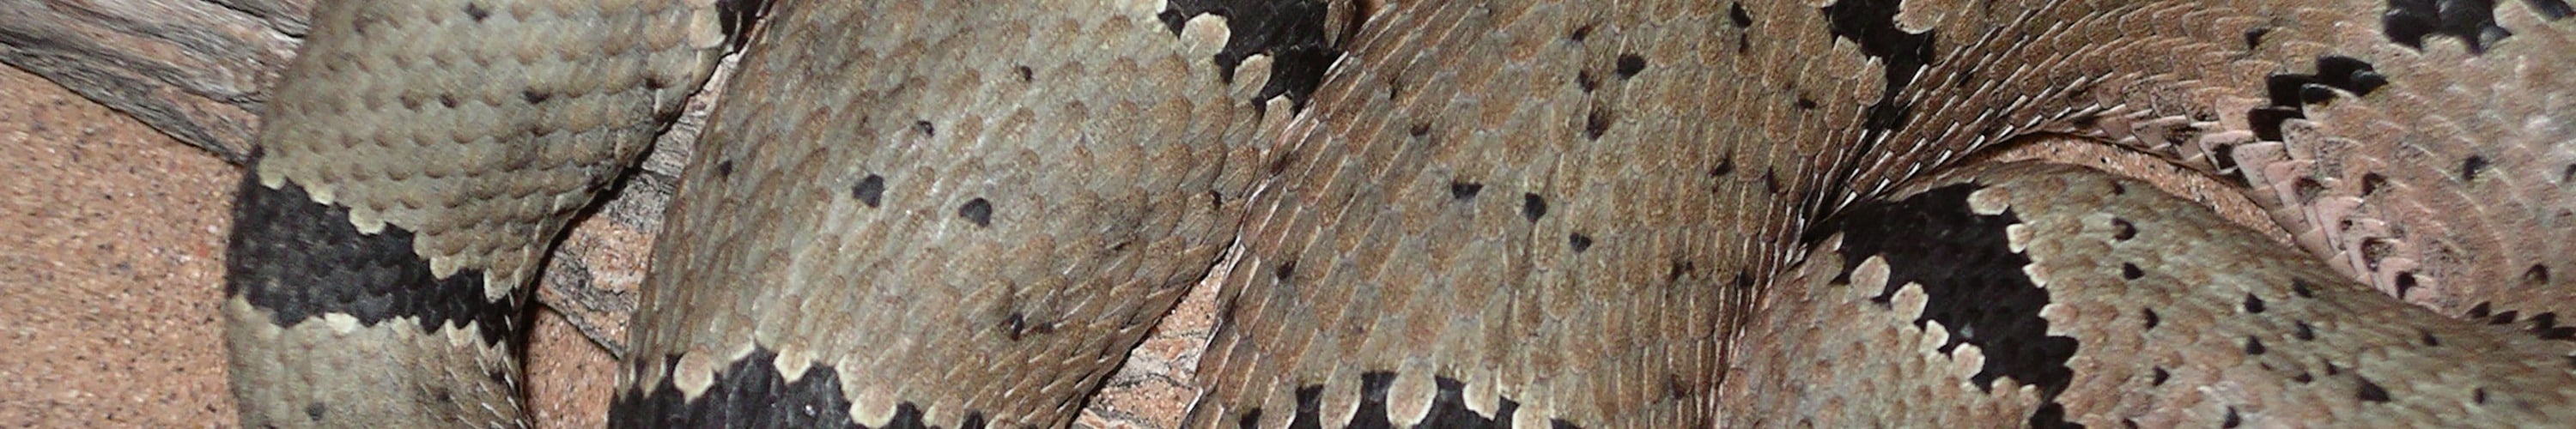 
        <div class='title'>
          Banded2Insta
        </div>
       